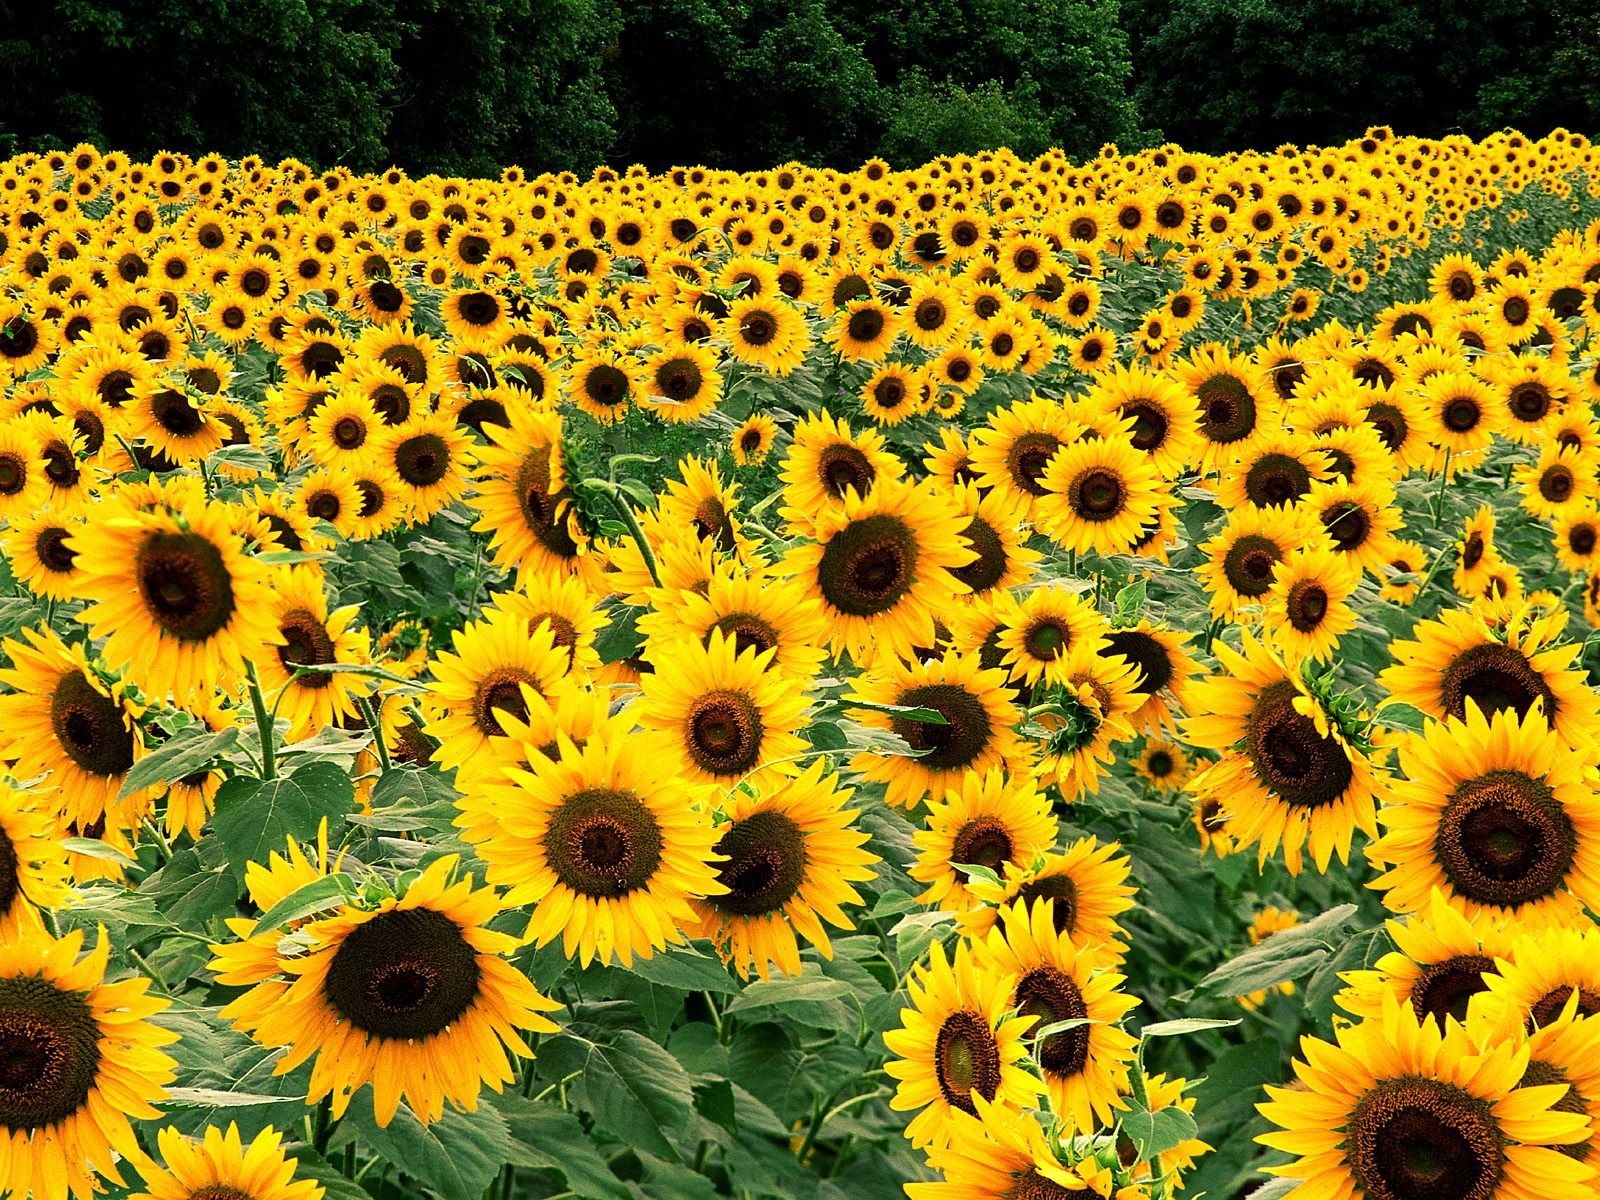 View Over Sunflowers Field Photo and Desktop Wallpaper